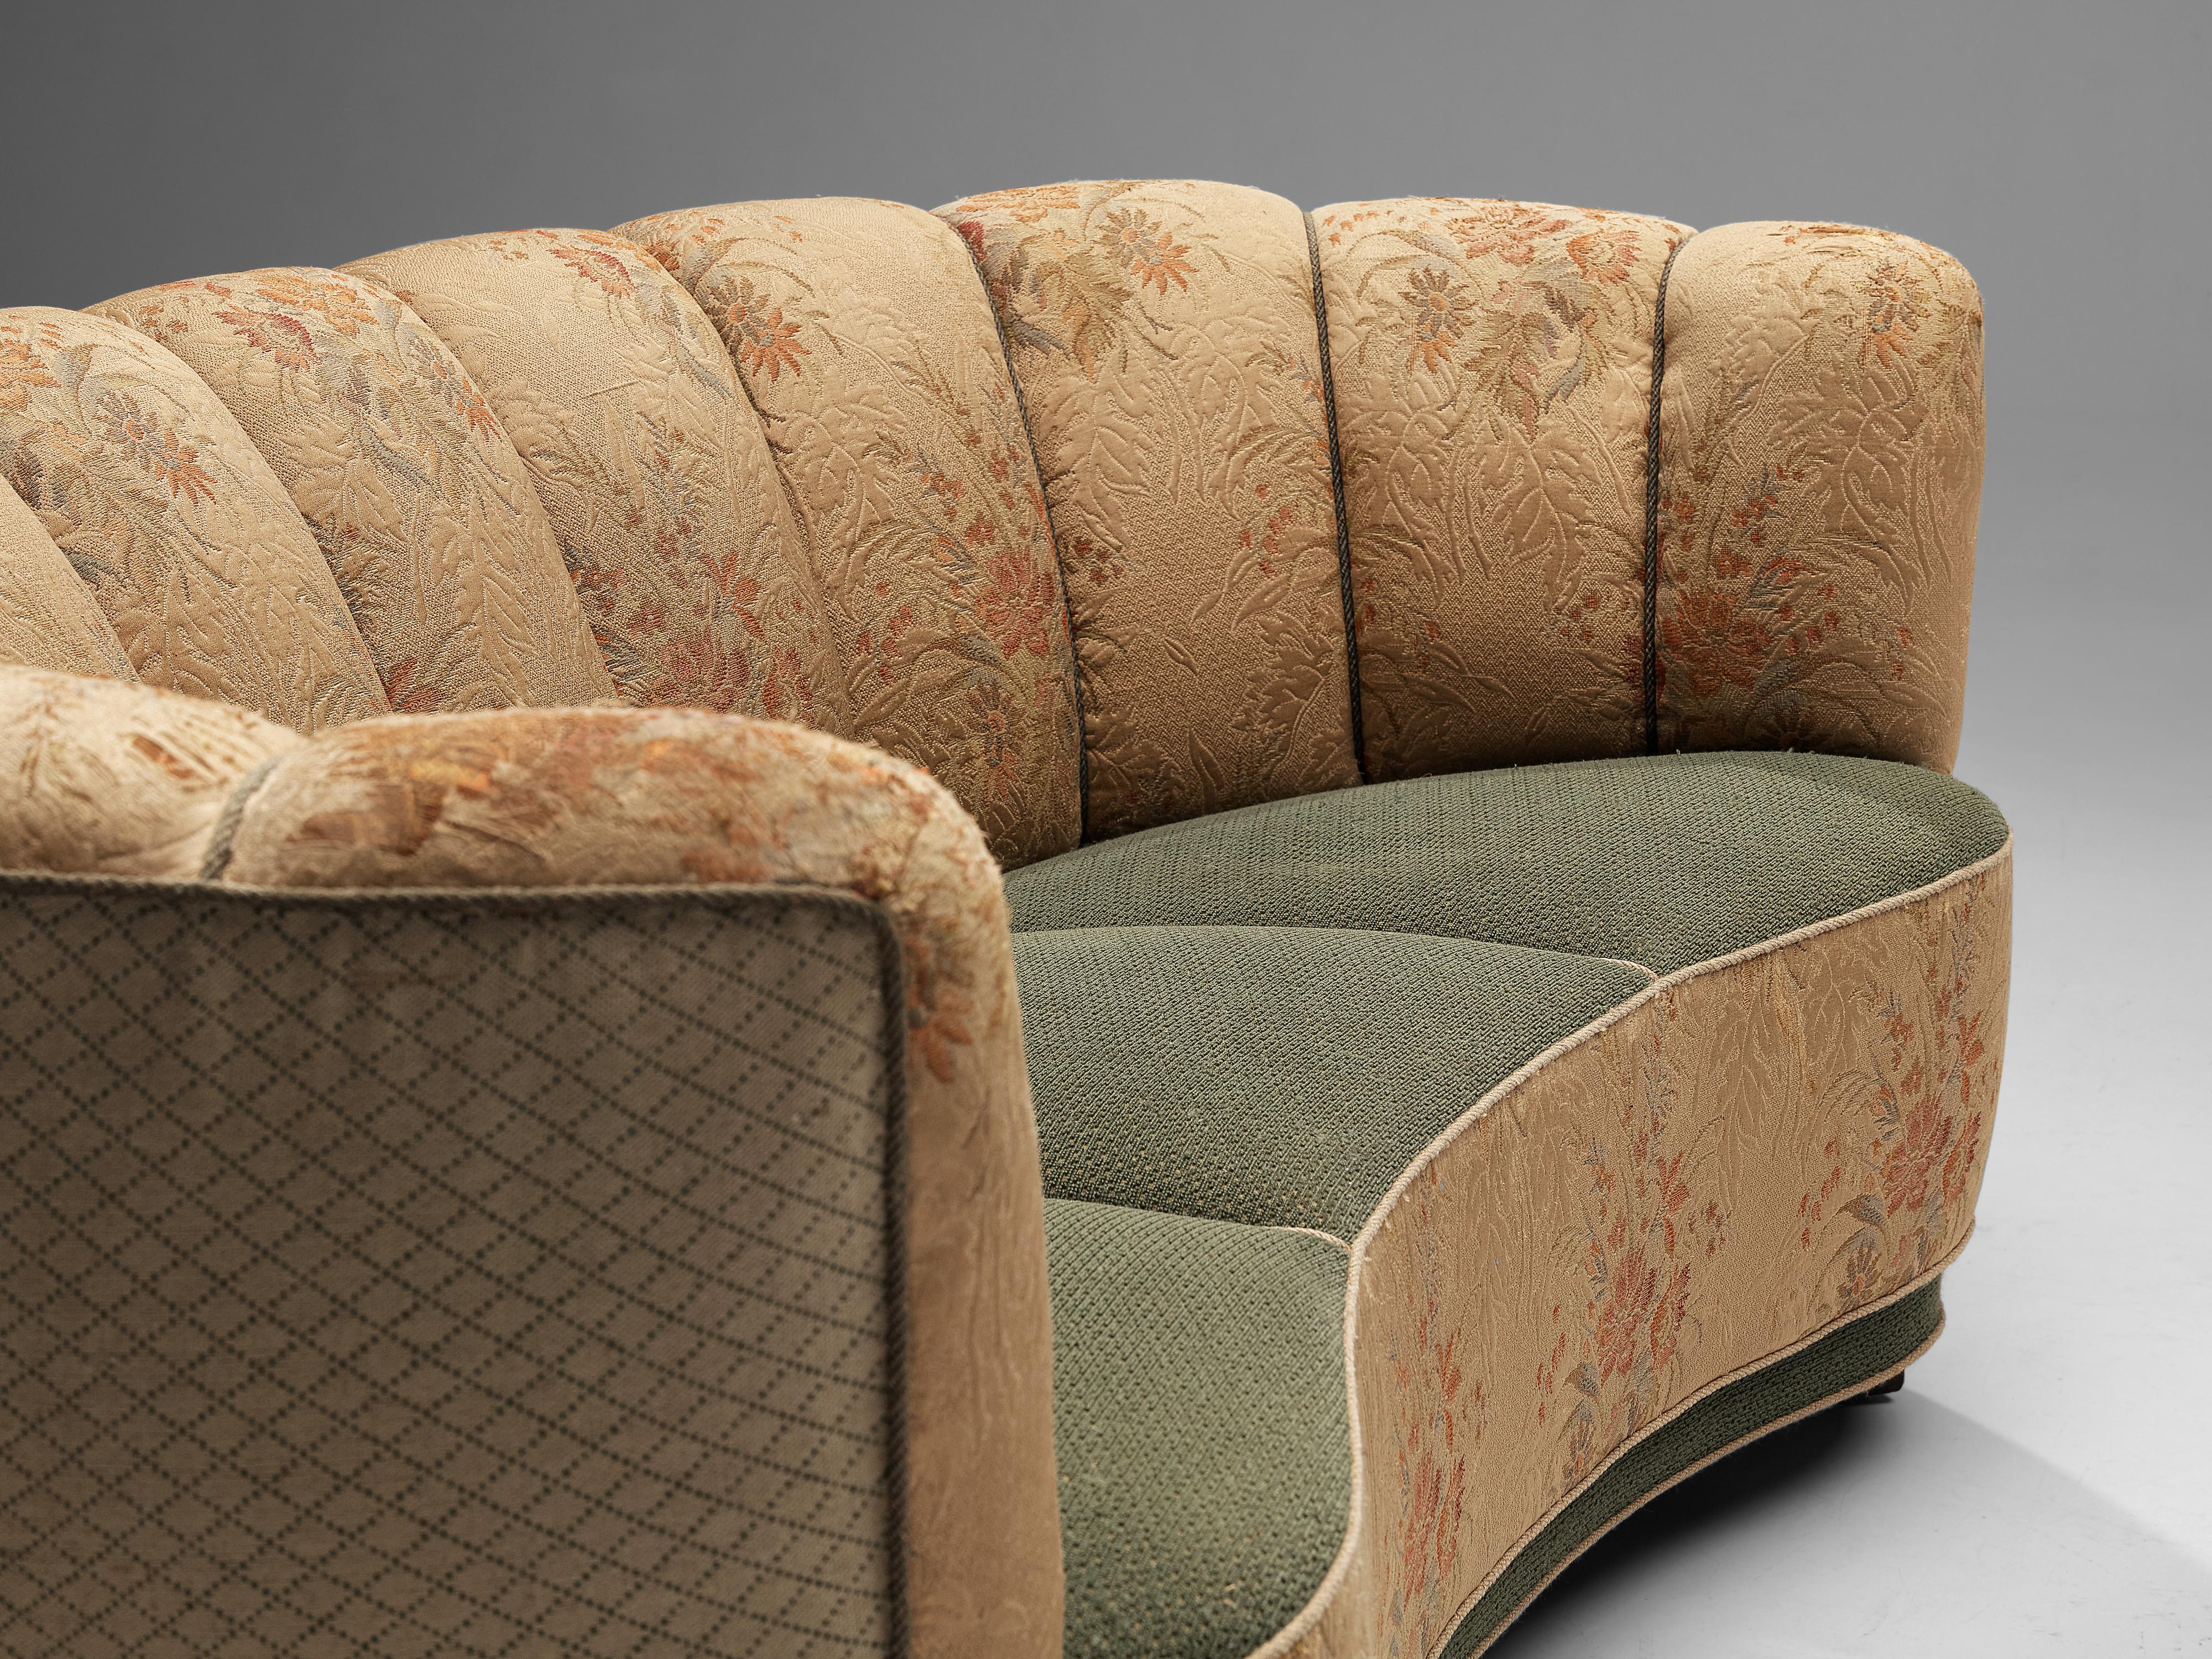 Mid-20th Century Danish Banana Sofa in Floral Upholstery For Sale